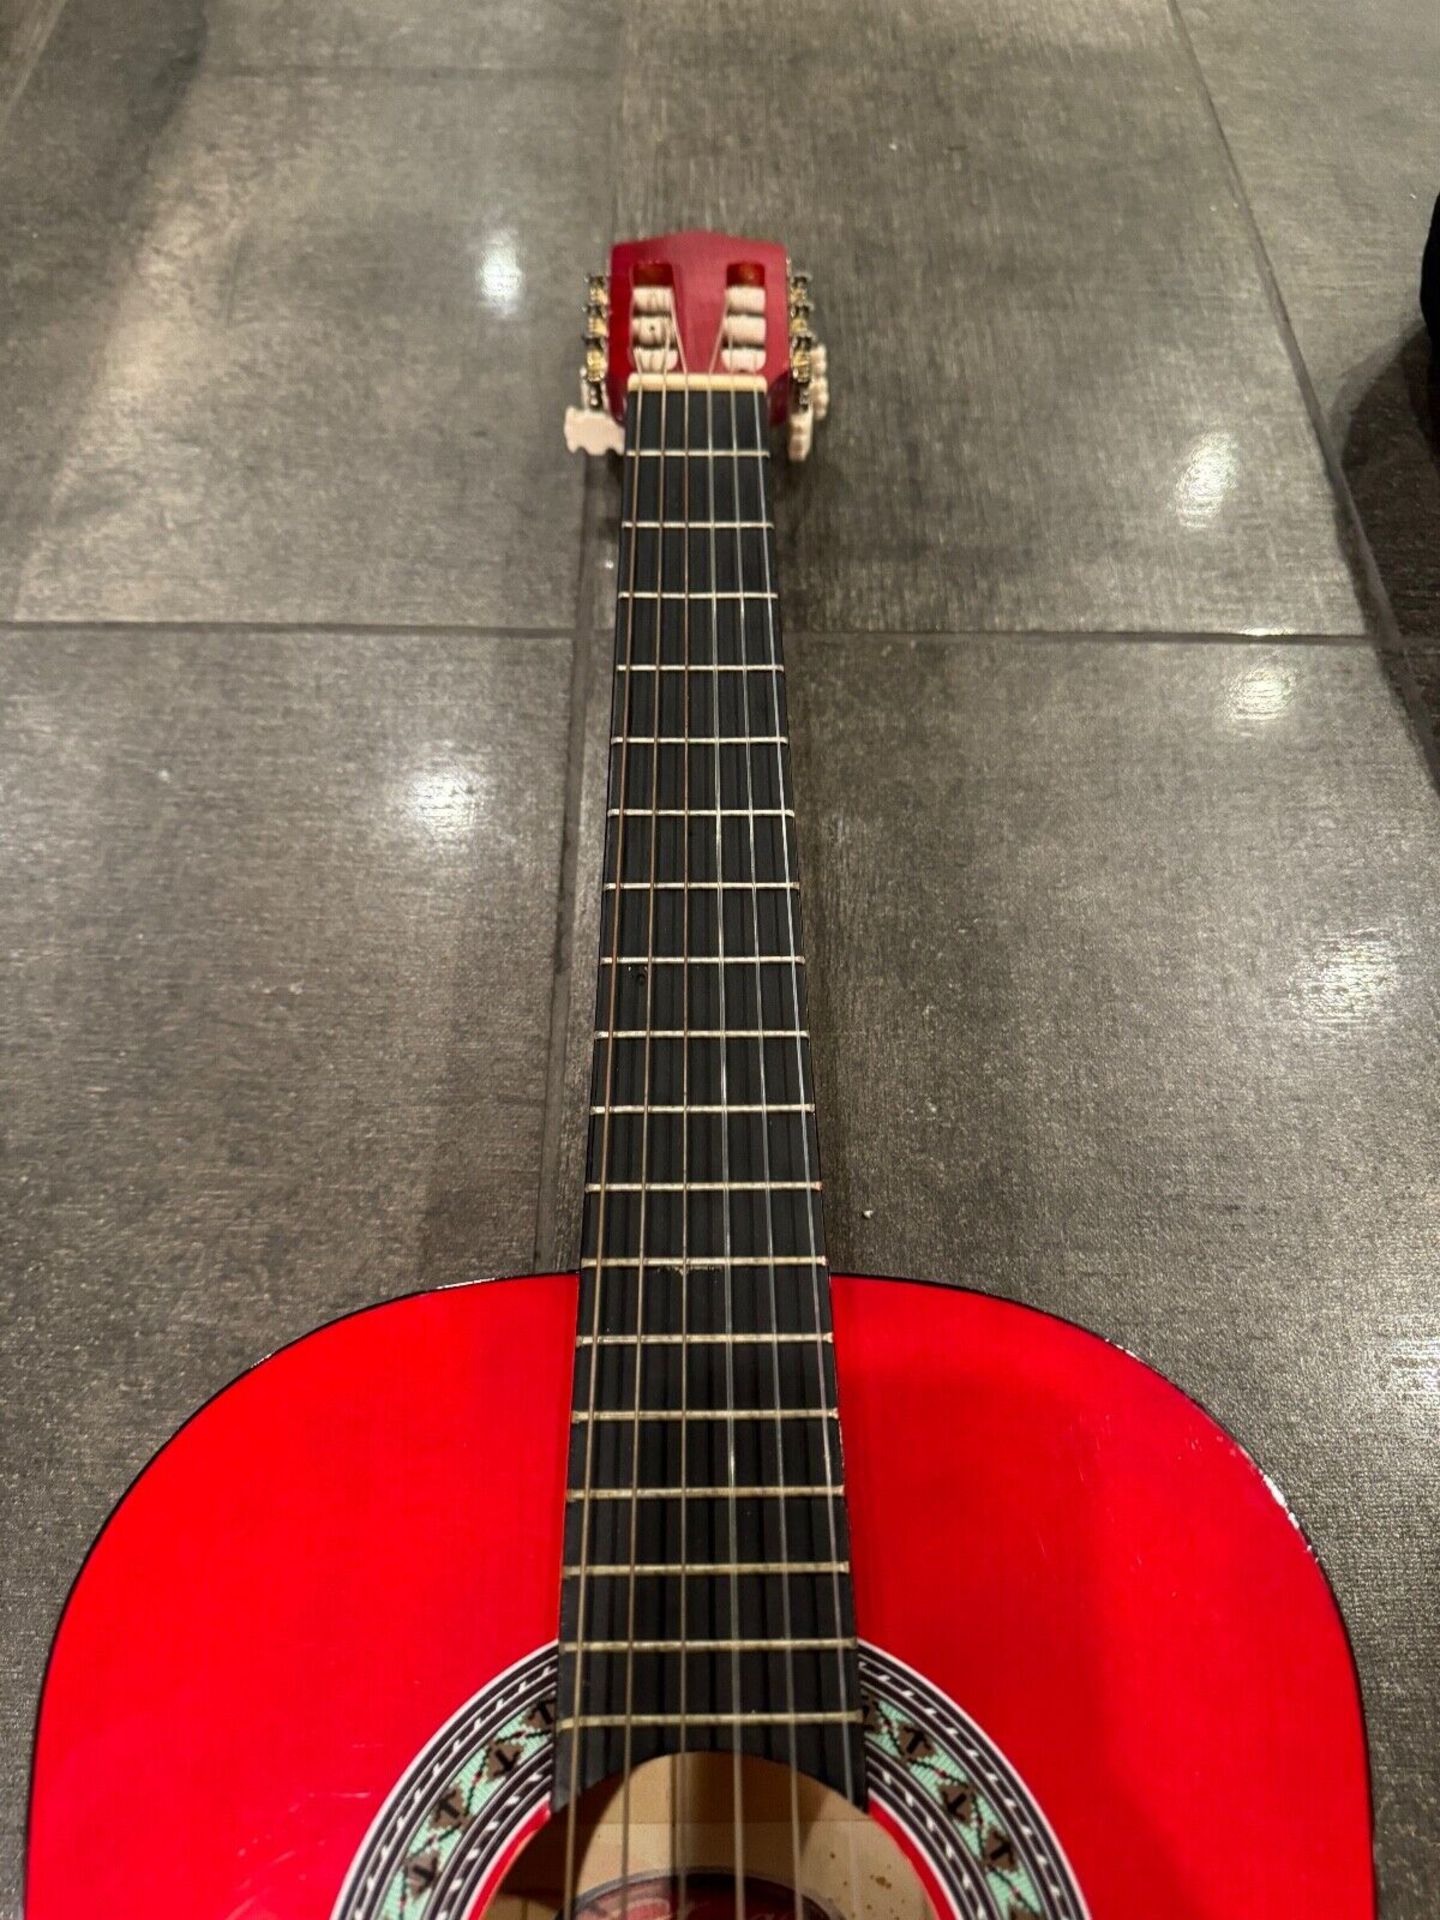 Stagg Handmade Classical Guitar Model C530 TR RED + Case + Profile PT-500 Tuner - Image 3 of 5